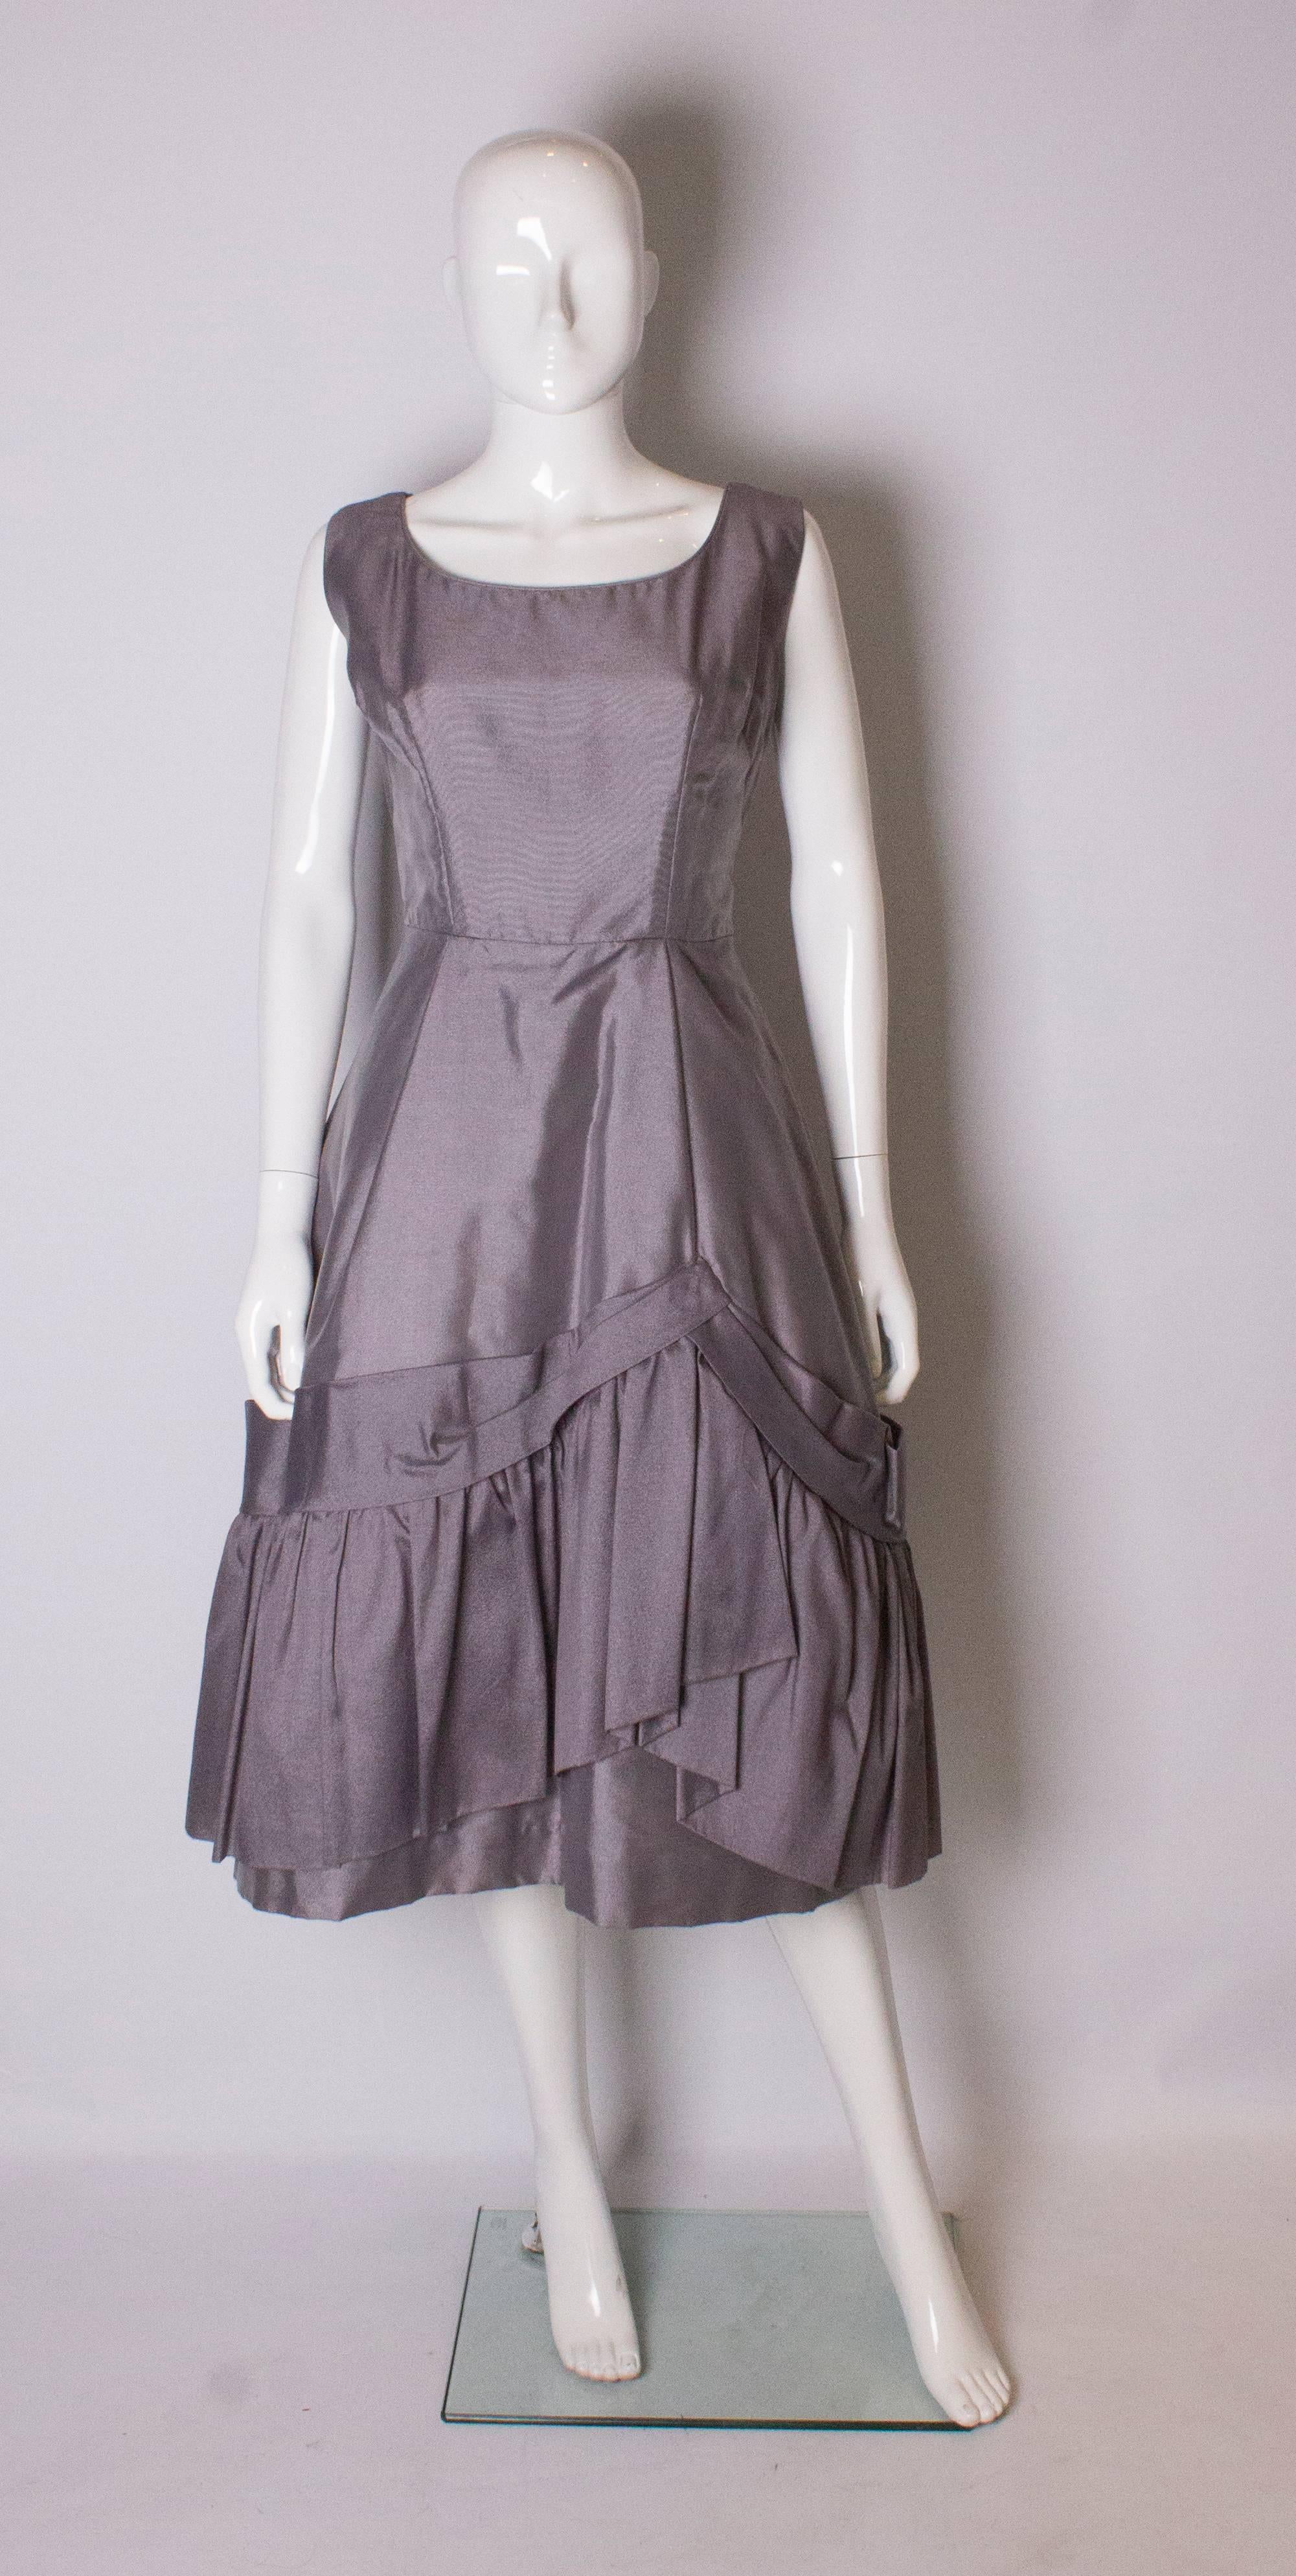 A pretty dove grey vintage cocktail dress by Zenith Original. The dress has a scoop necklline, front and back and as a built in petticoat with frill at the hem.